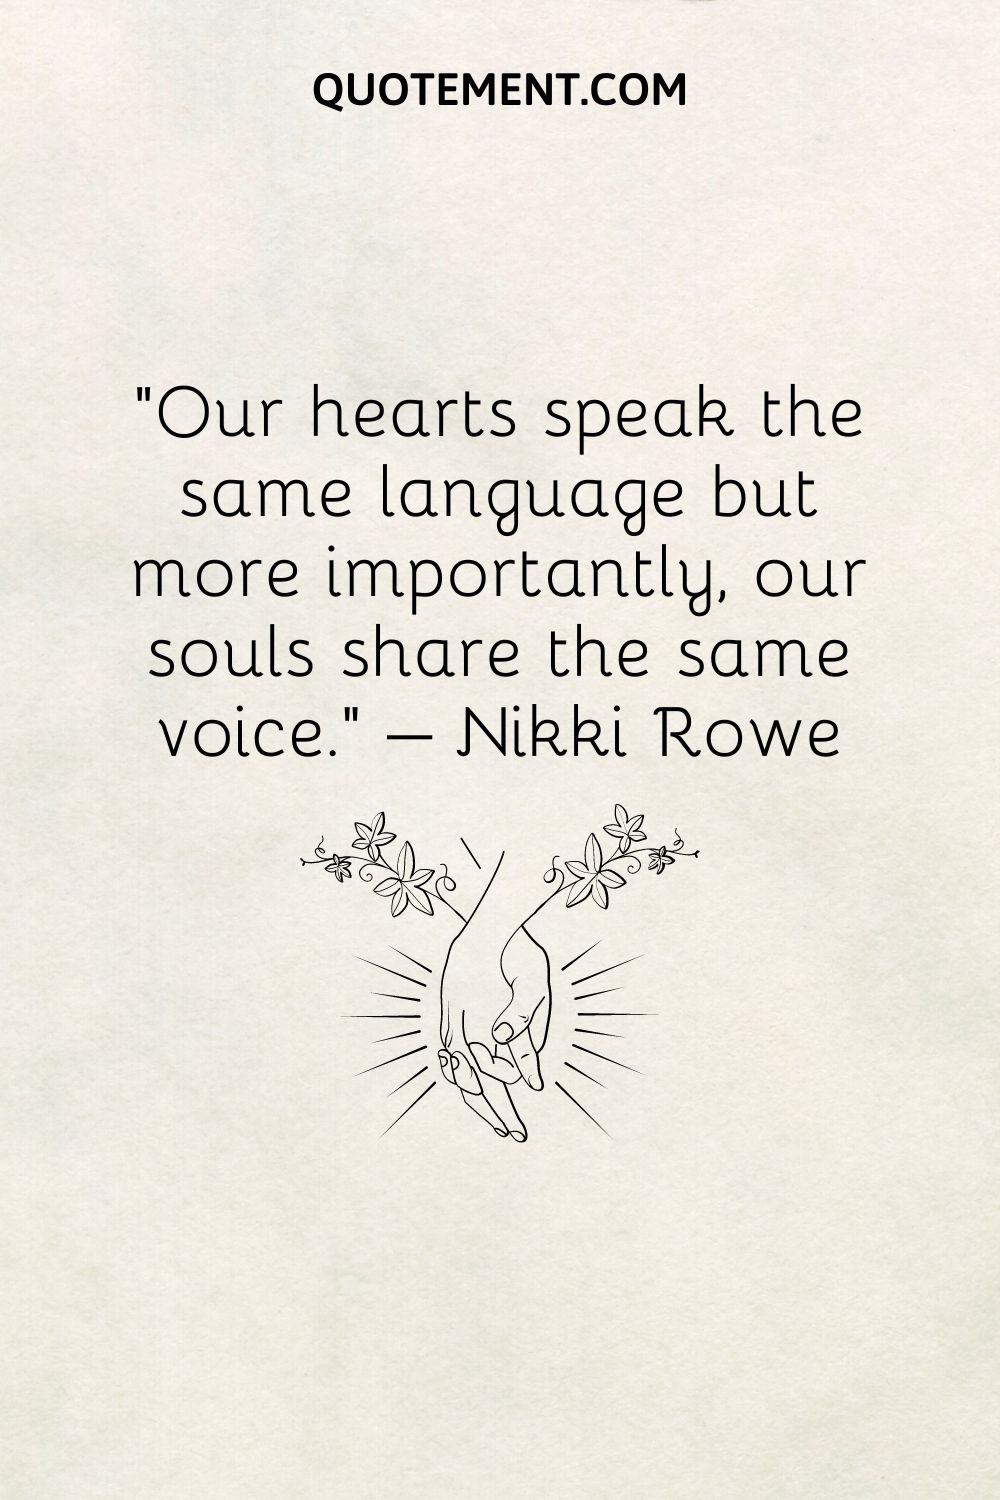 Our hearts speak the same language but more importantly, our souls share the same voice.